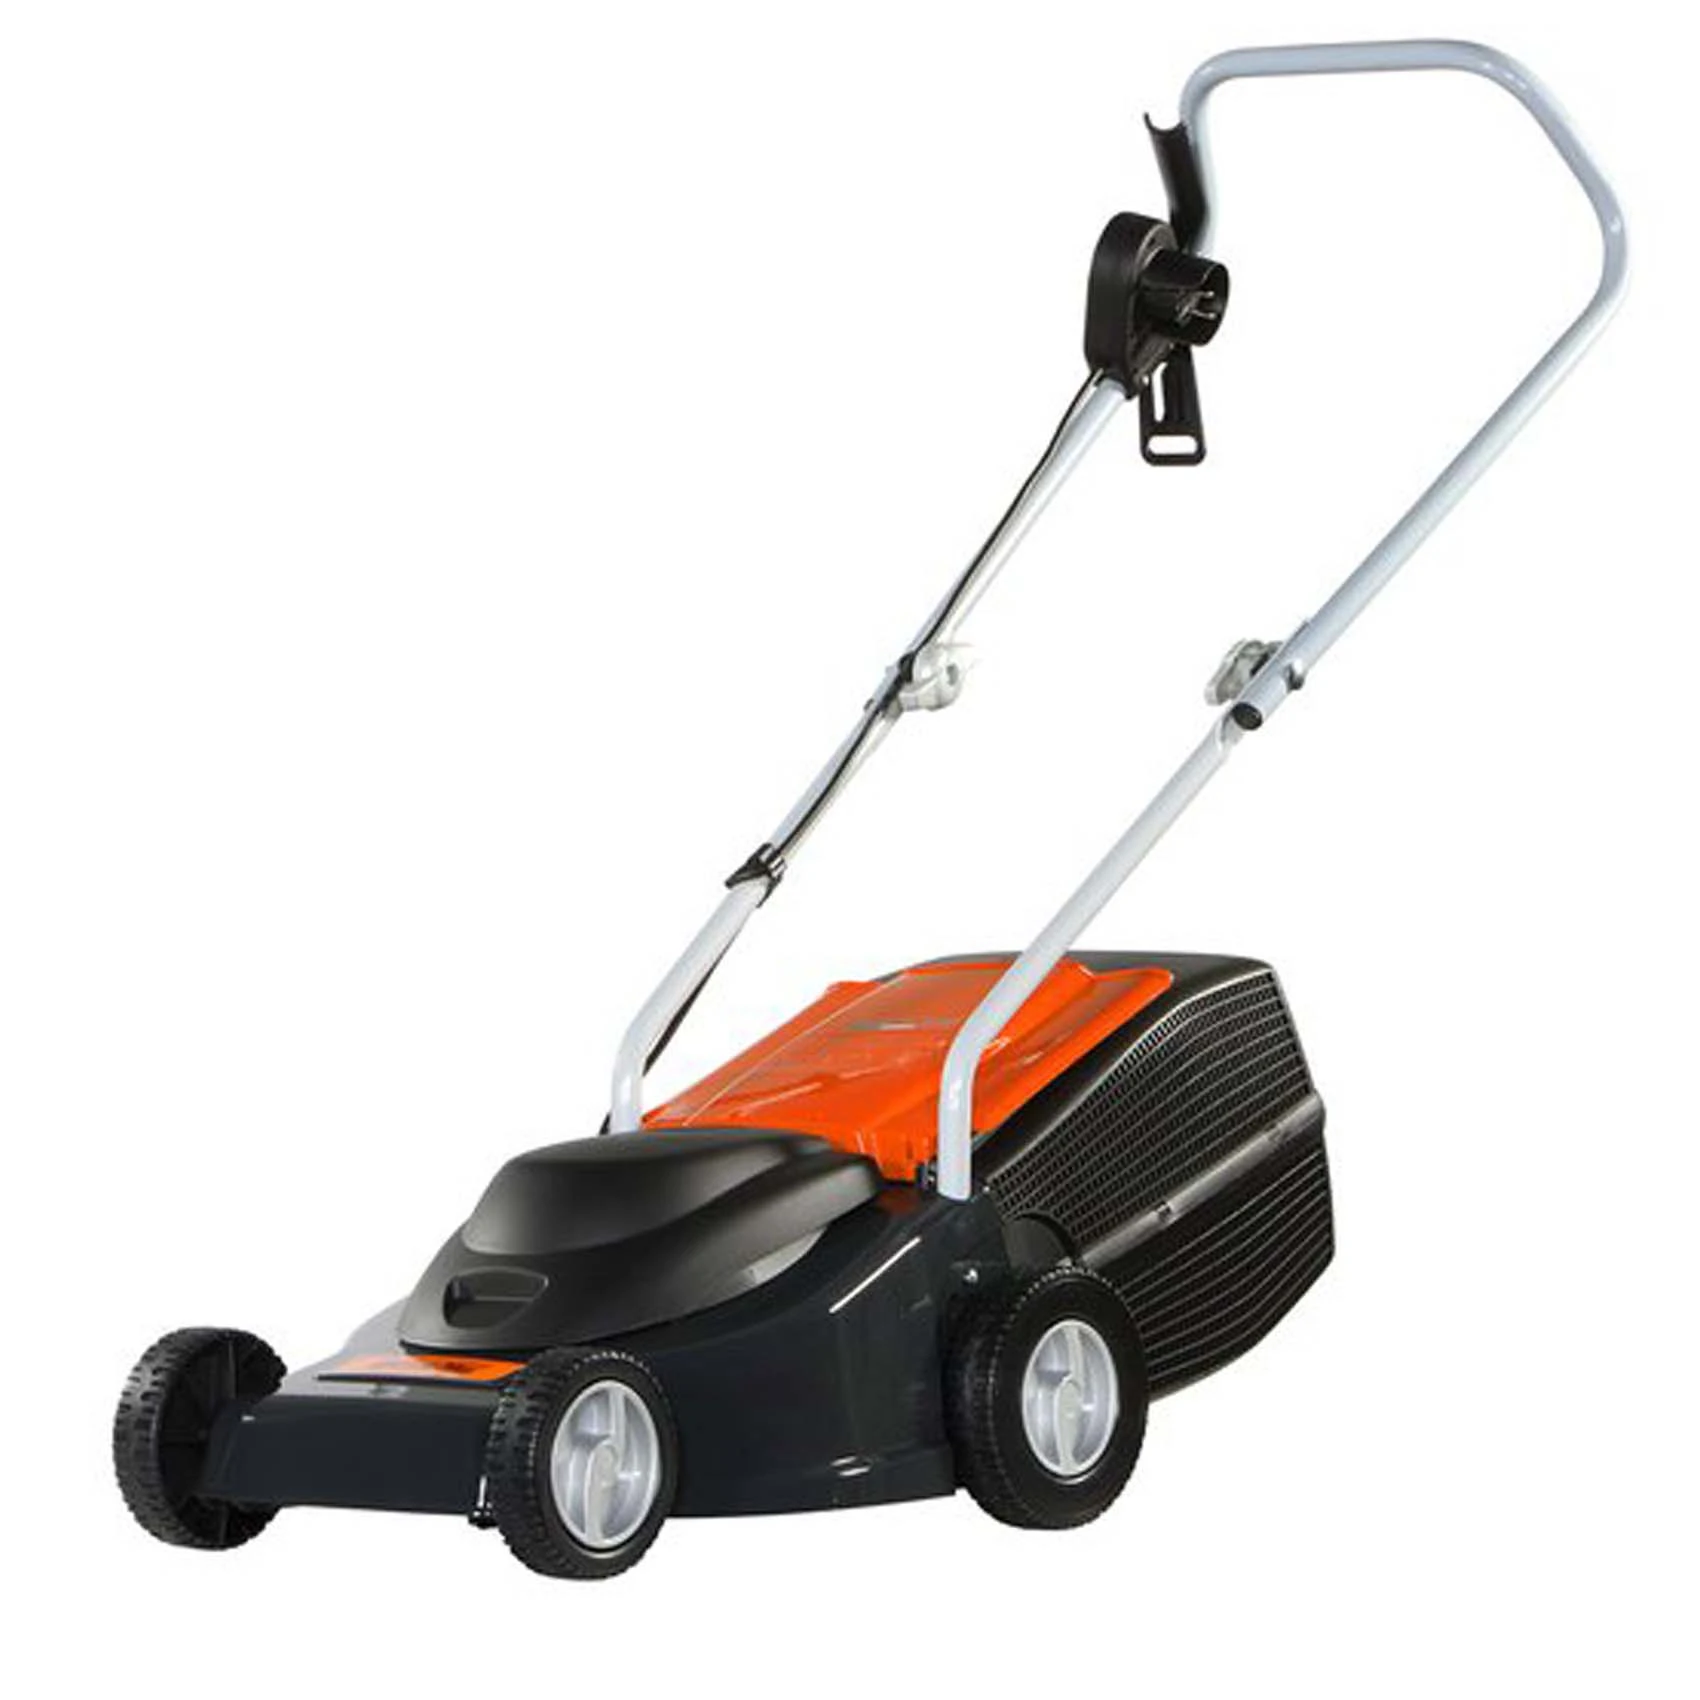 OLEOMAC EMAK LAWNMOWER ELECTRIC 1100W K35P MADE IN  ITALY | GRASS CUTTER | GRASS TRIMMER | LANDSCAPE MACHINERY